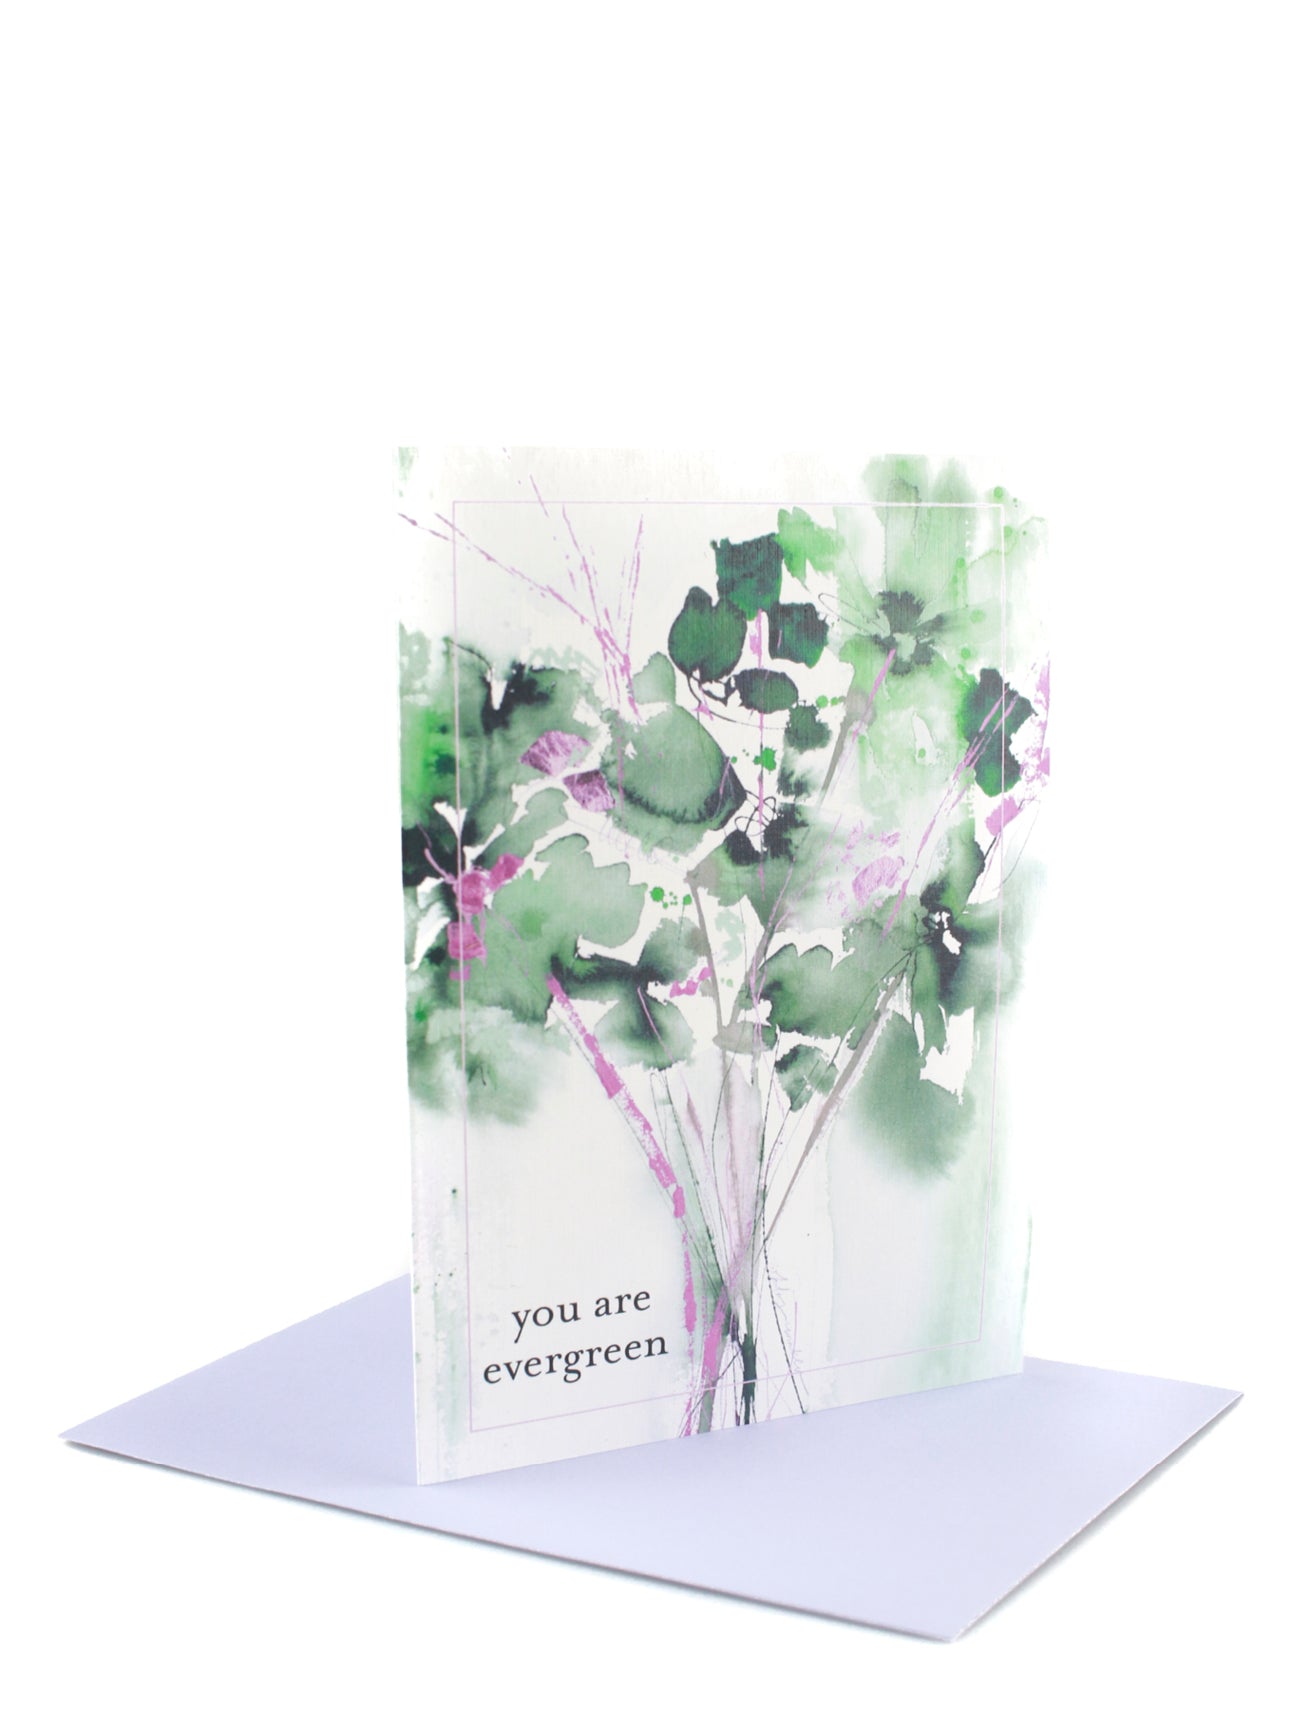 5x7 "You are Evergreen" Greeting Card